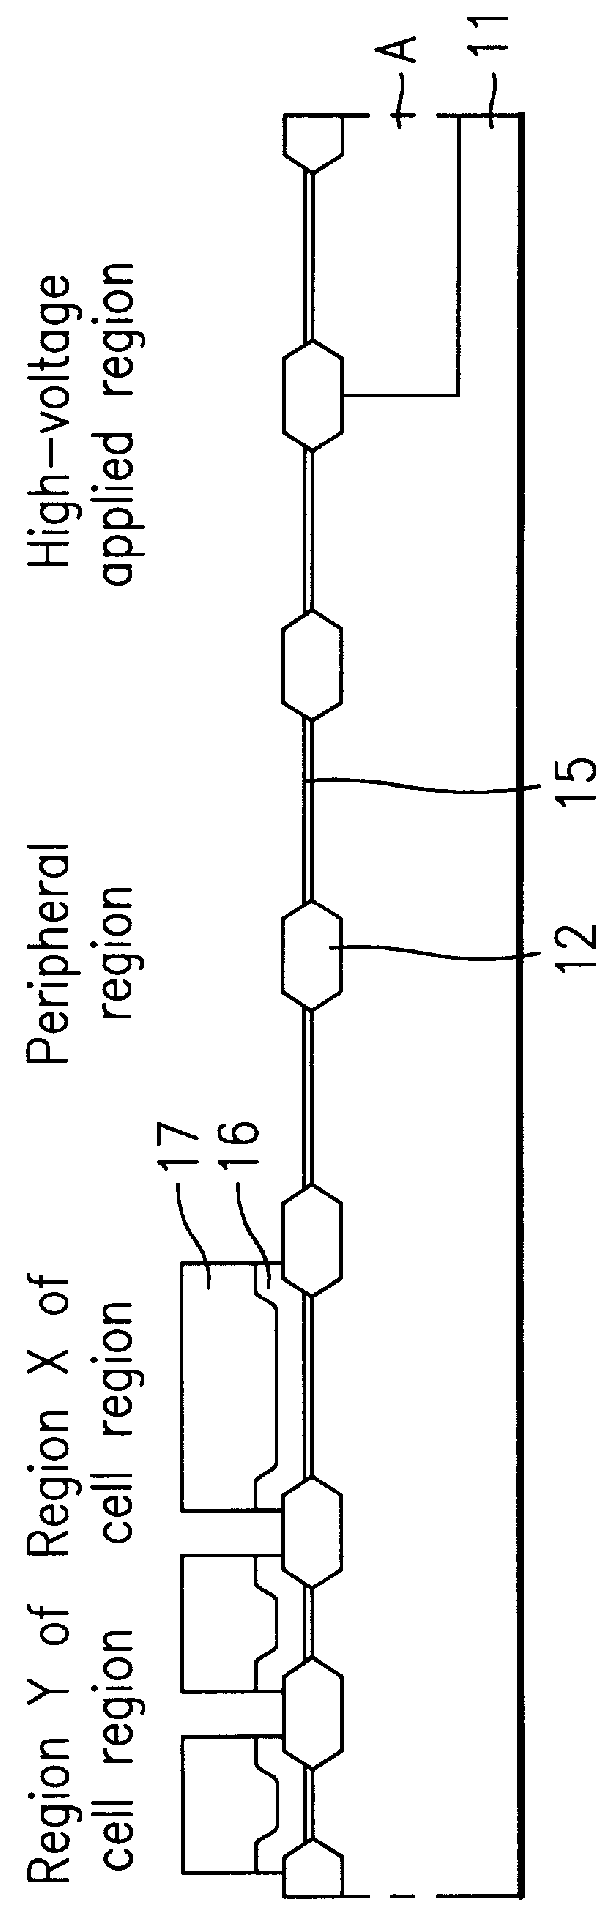 Method of manufacturing semiconductor device comprising high voltage regions and floating gates